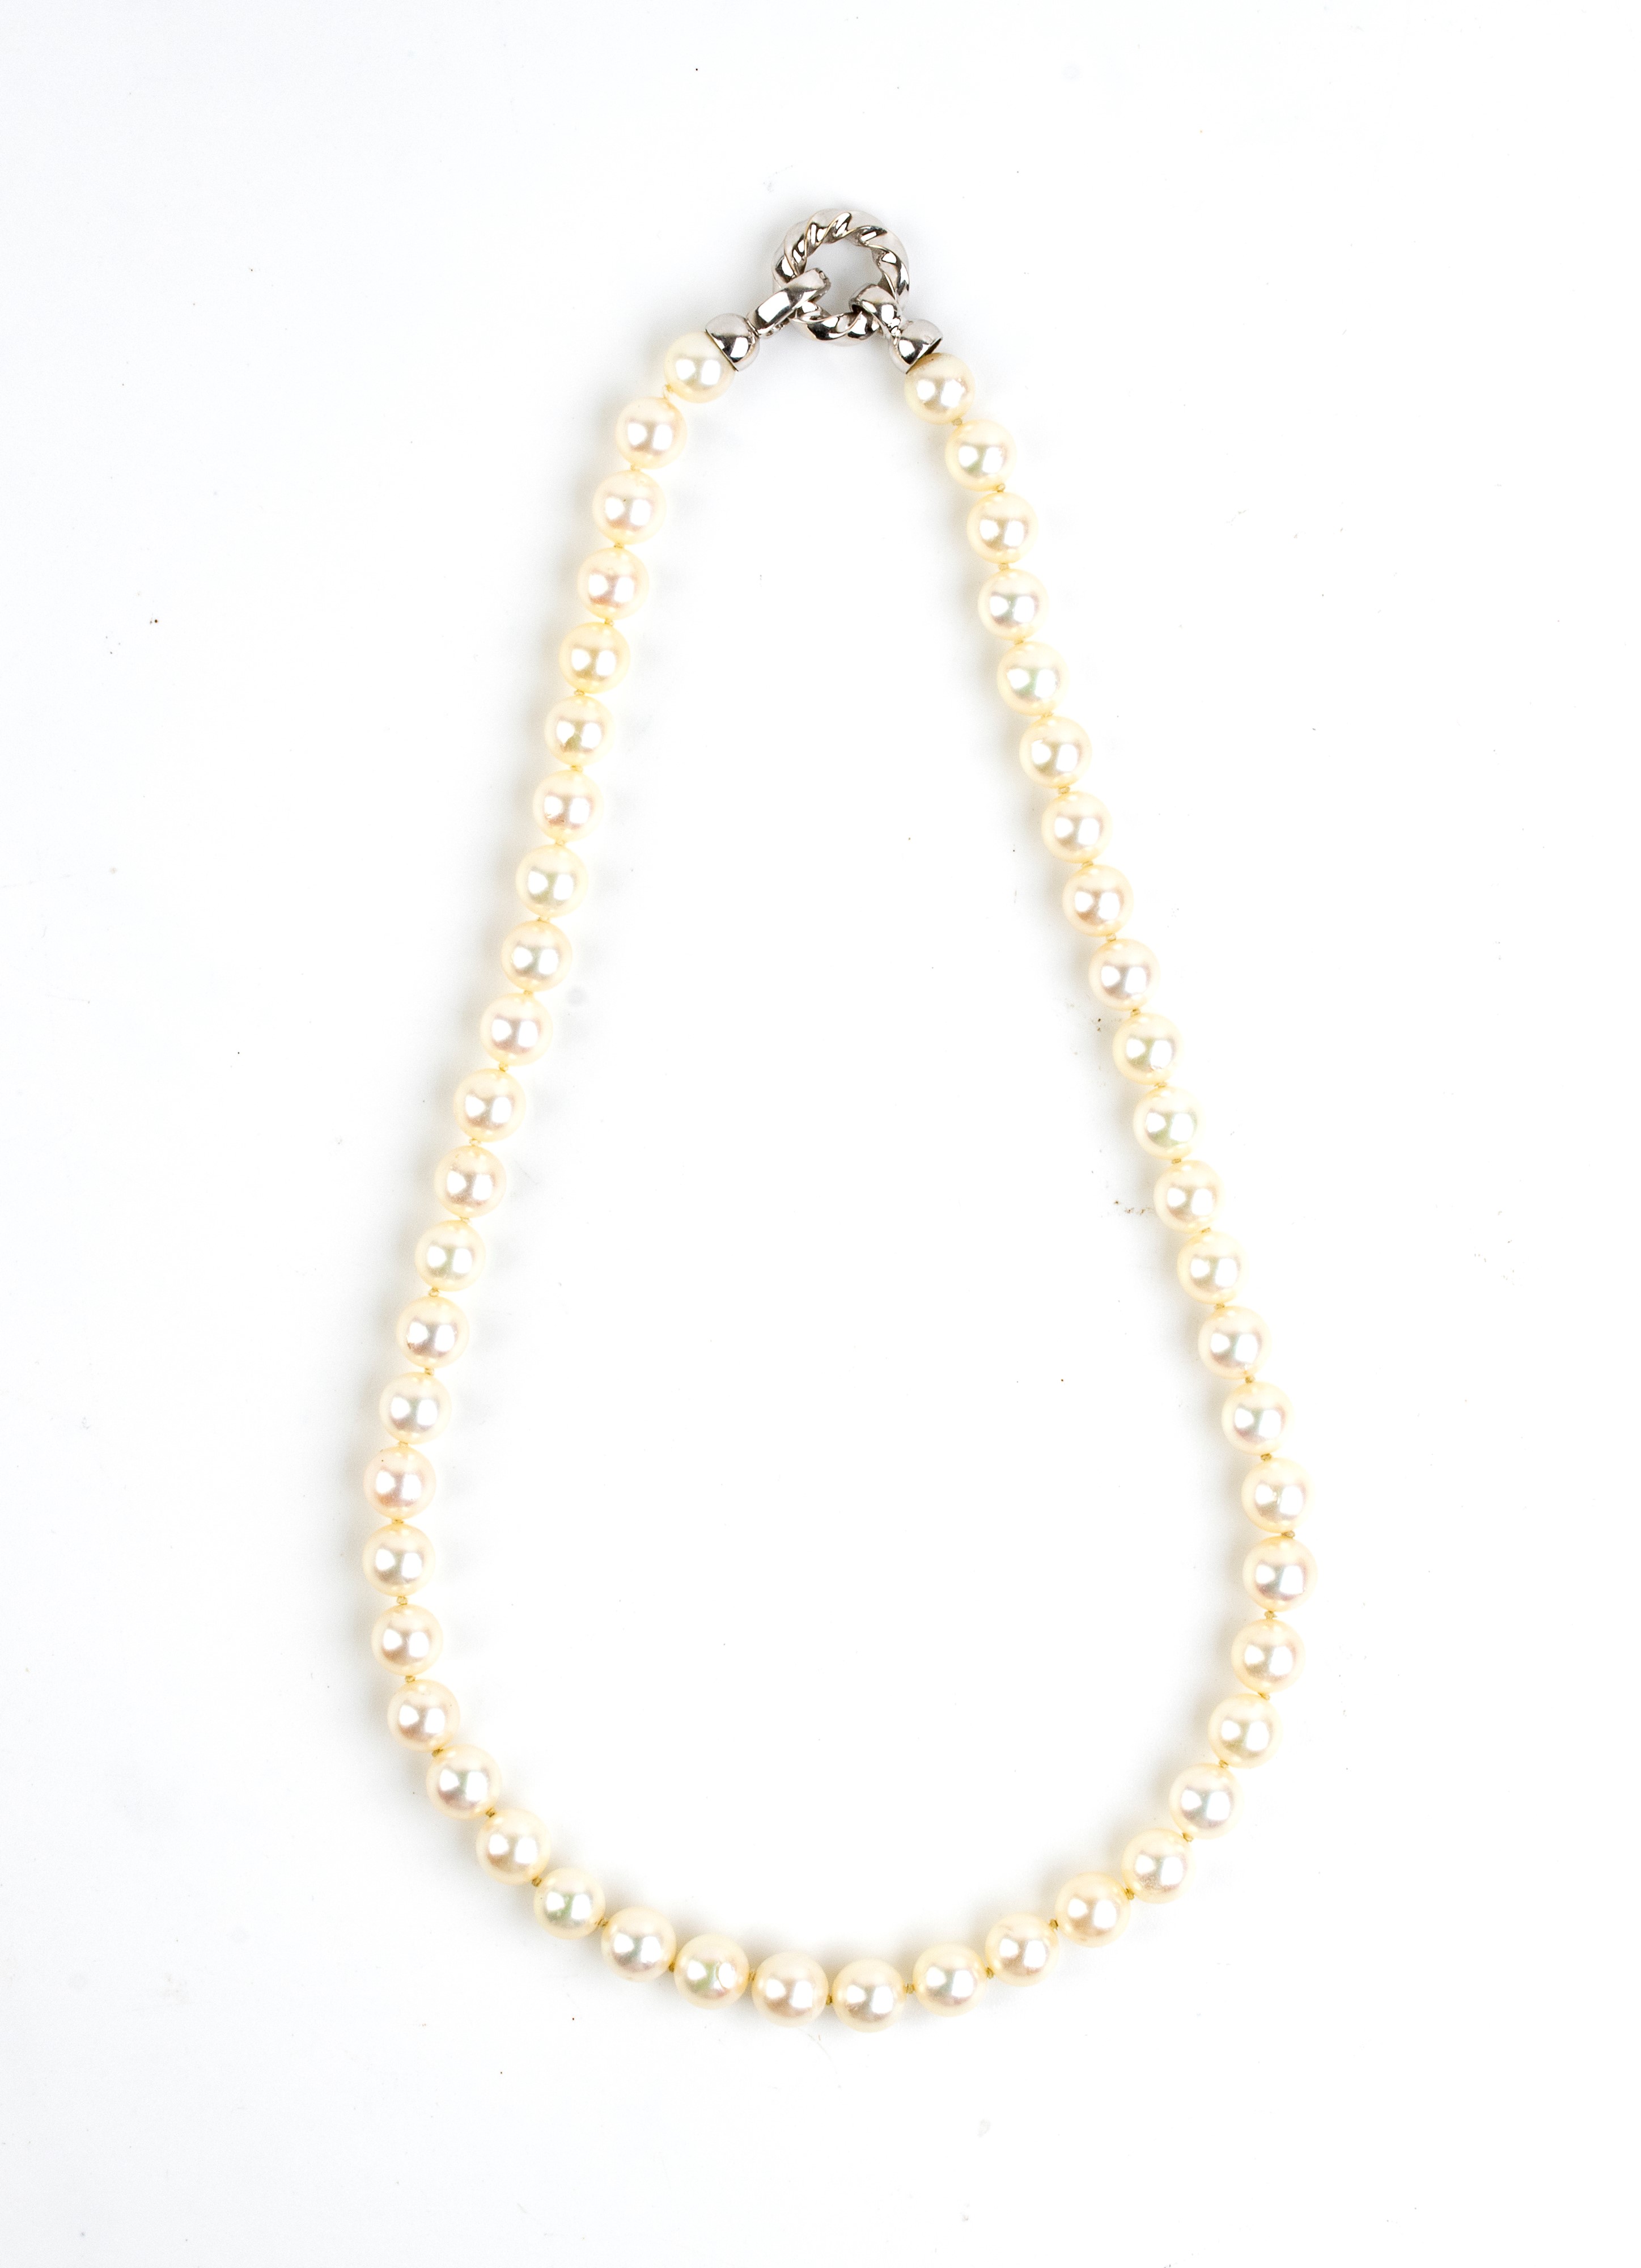 Gold pearl necklace - Auction Jewellery, Watches, Pens - Bertolami Fine ...